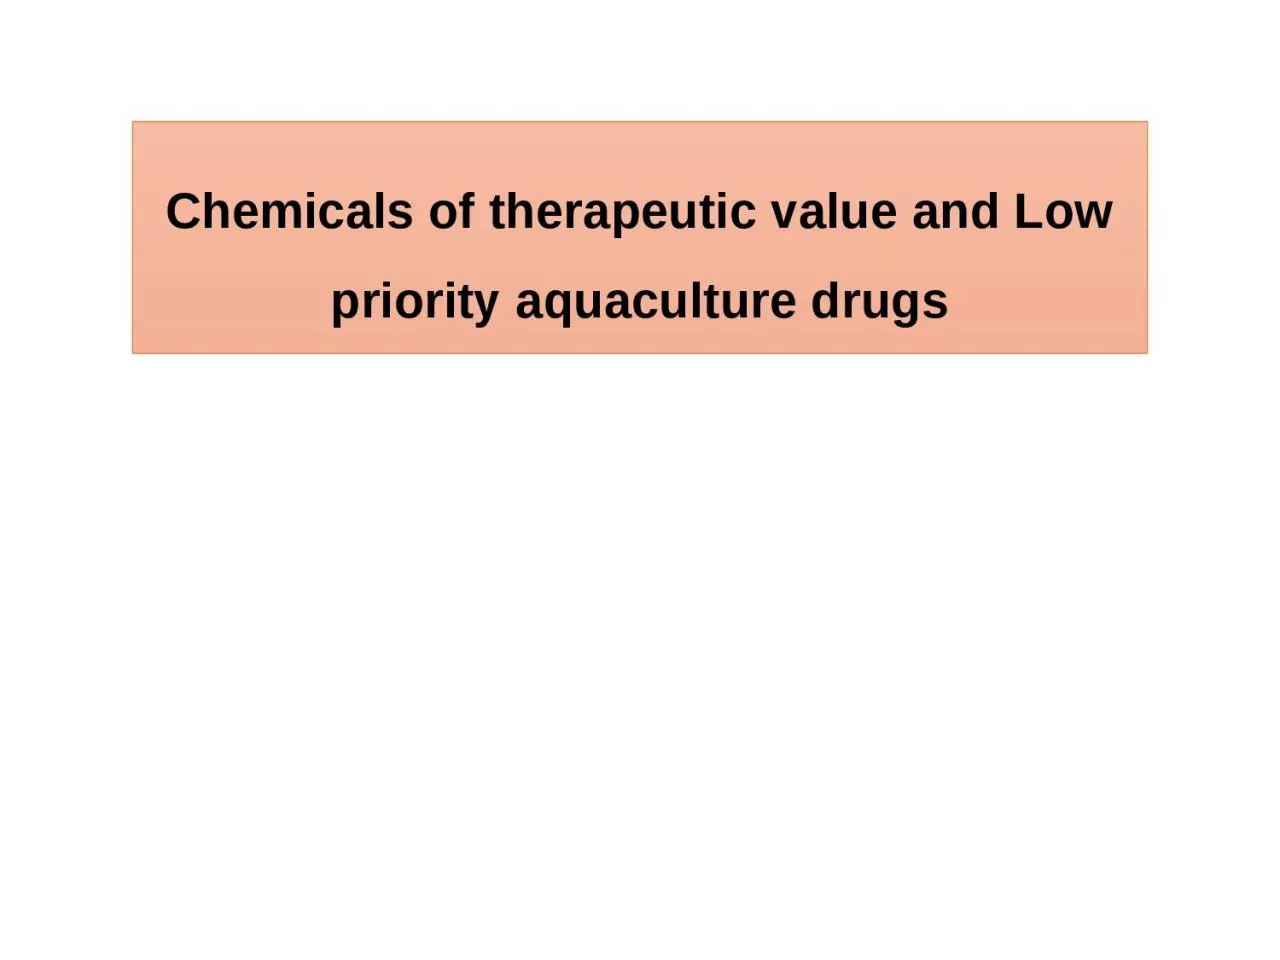 Chemicals of therapeutic value and Low priority aquaculture drugs